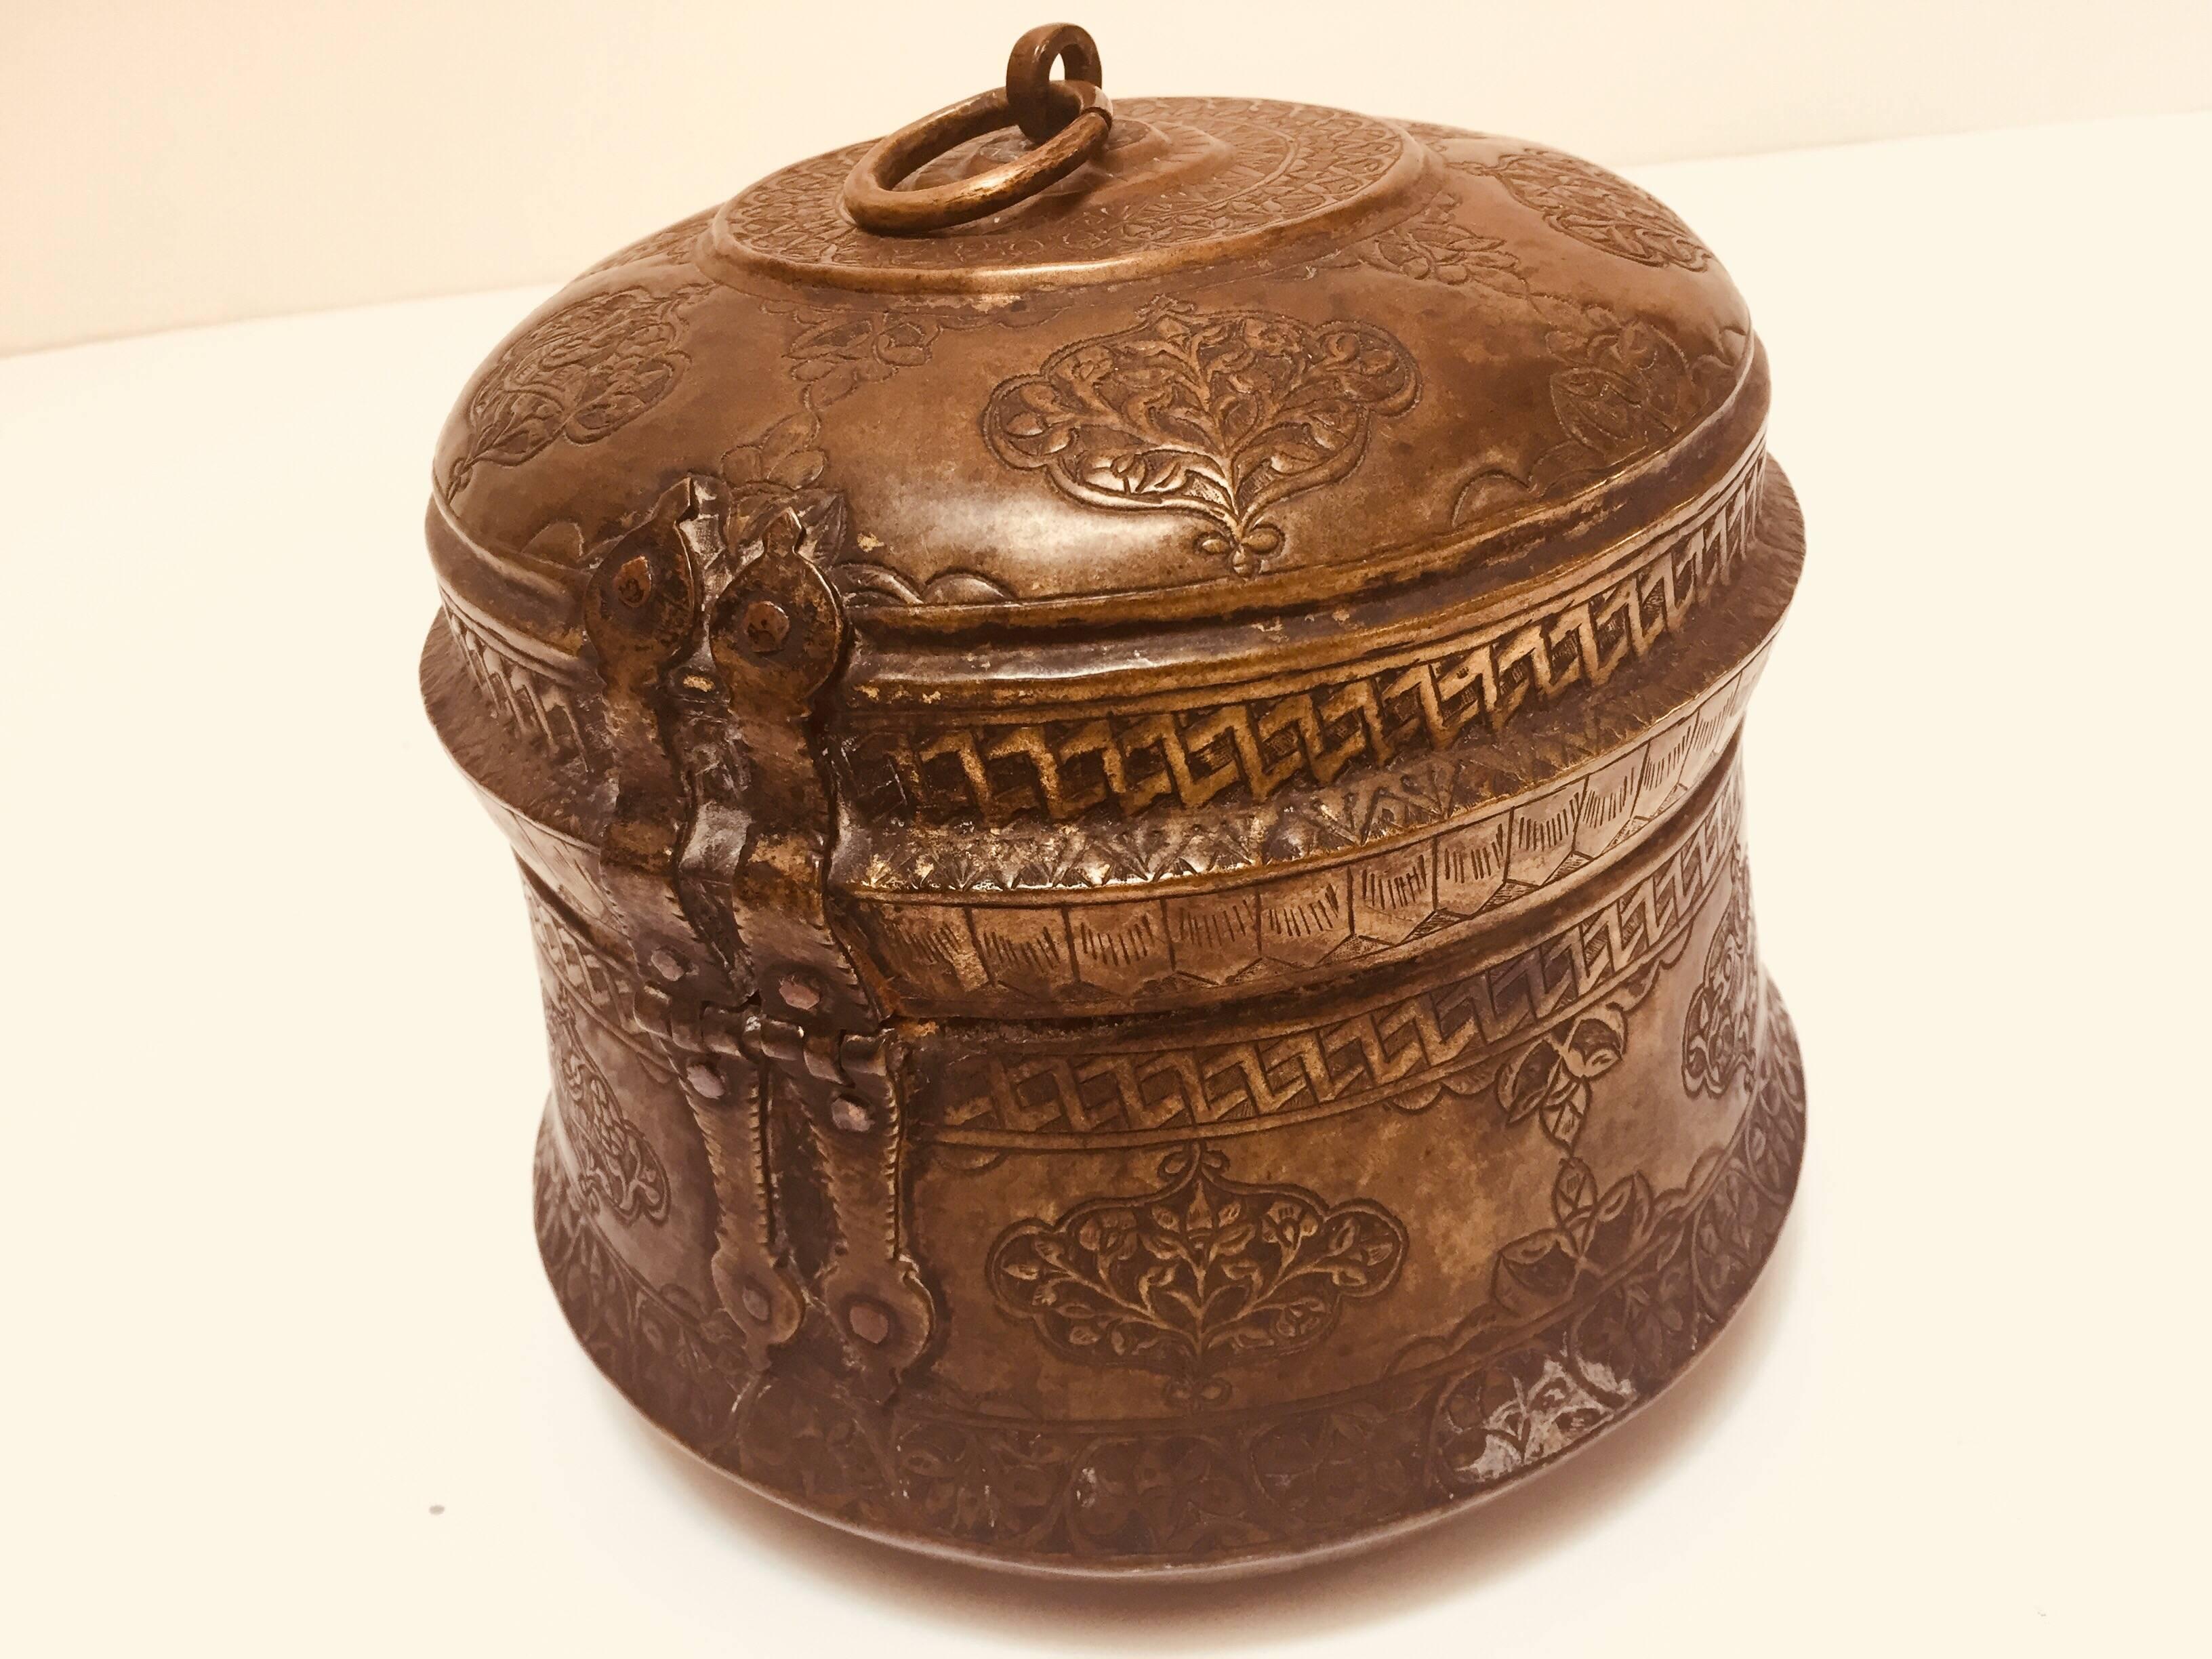 Beautiful handcrafted decorative Indo-Islamic collectible round copper betel nut trinket box with lid, latch and handle.
Delicately and intricately hand-hammered with floral and geometric designs.
Large round metal box hand made in the traditional